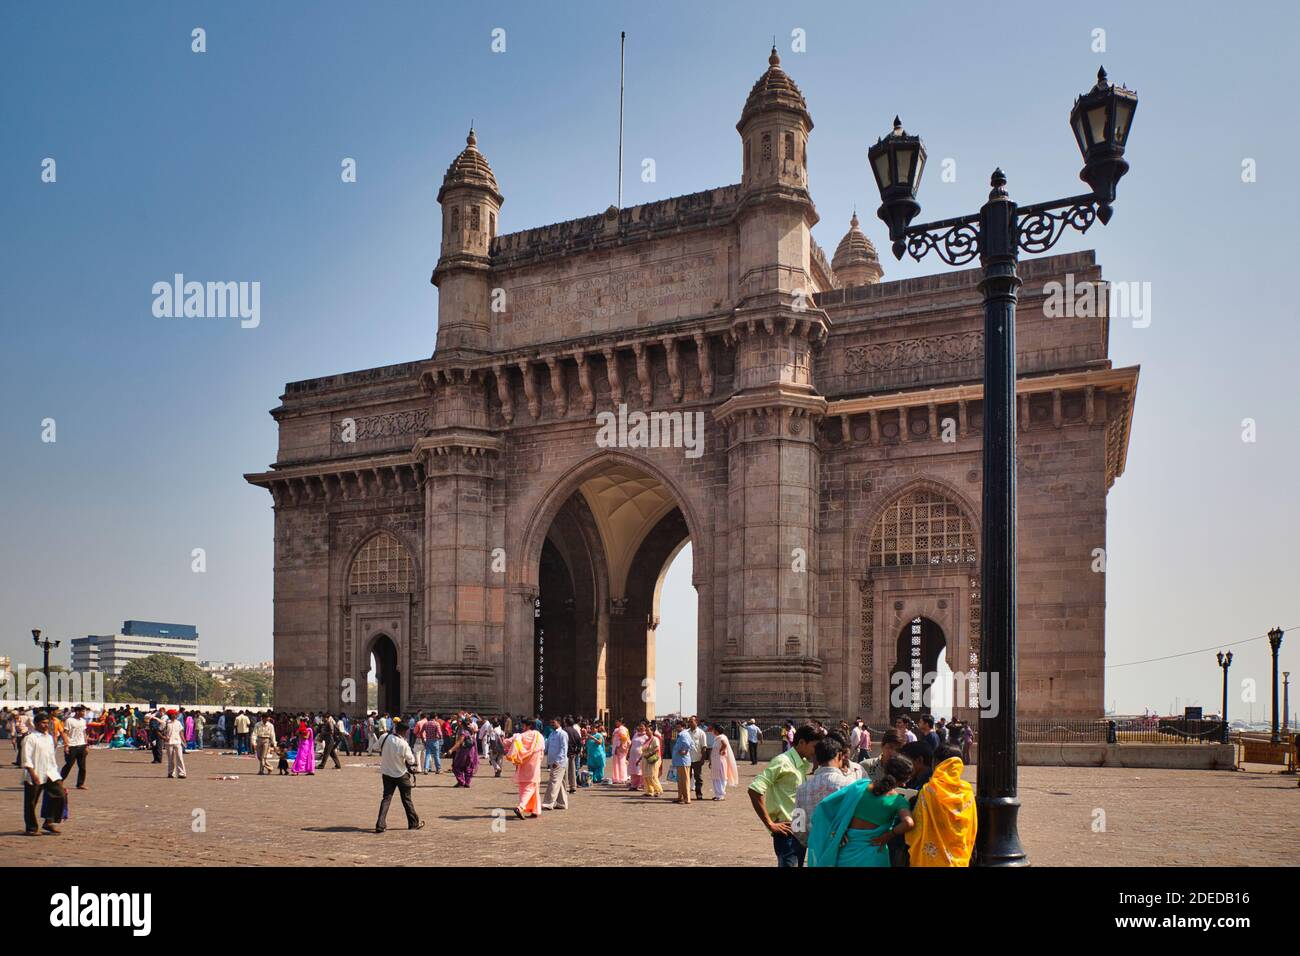 The famous stone building, monument and archway known as The Gateway of India in Mumbai, Maharashtra, India, with people milling around Stock Photo